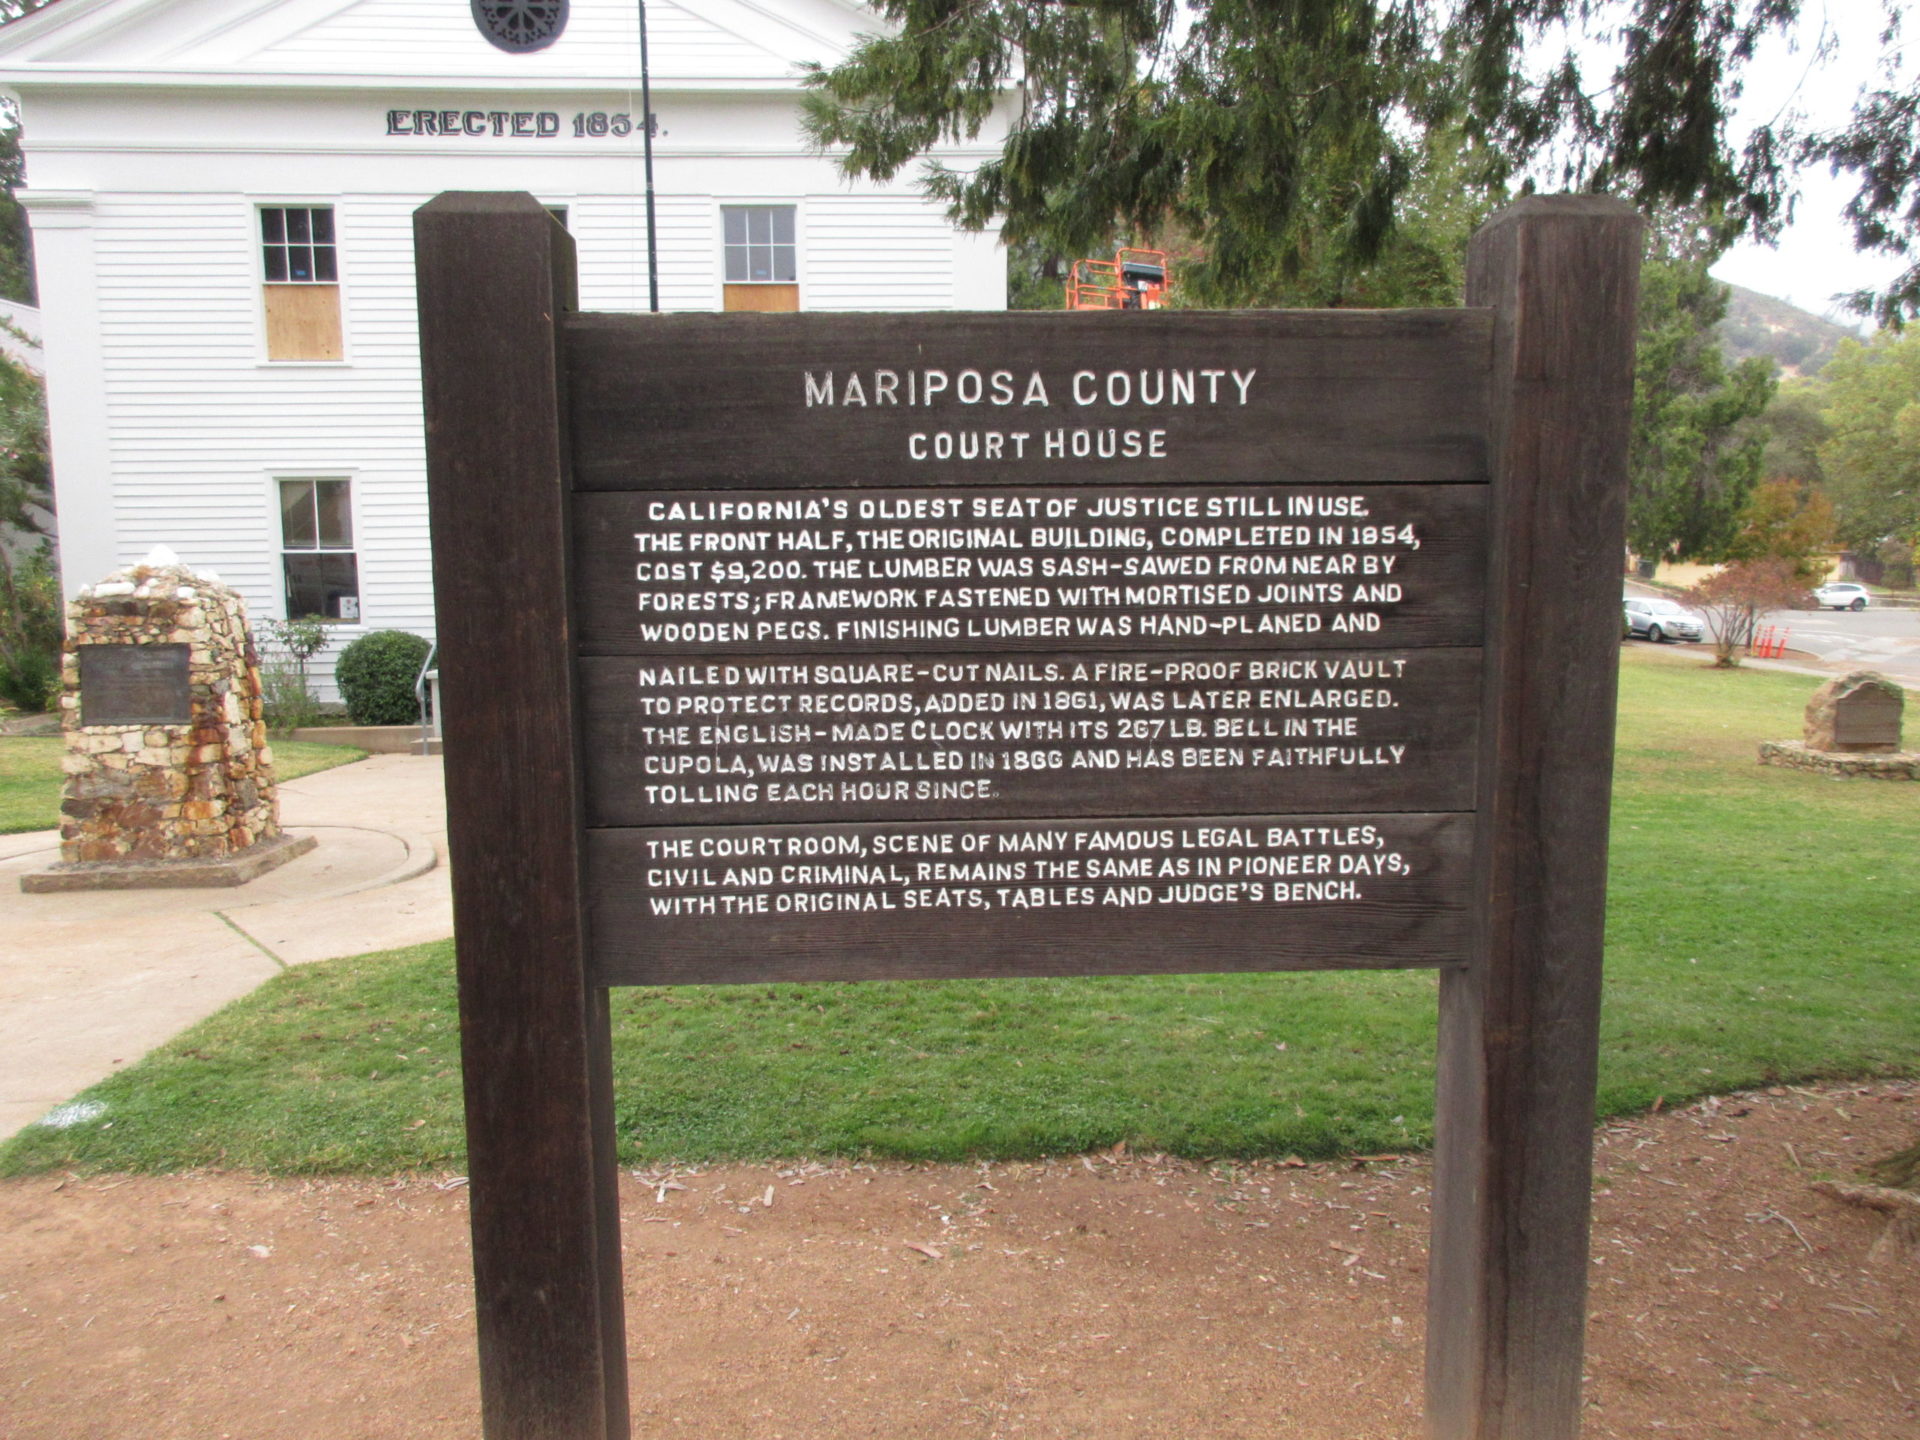 Image from the Gallery: Mariposa Courthouse – Mariposa, CA